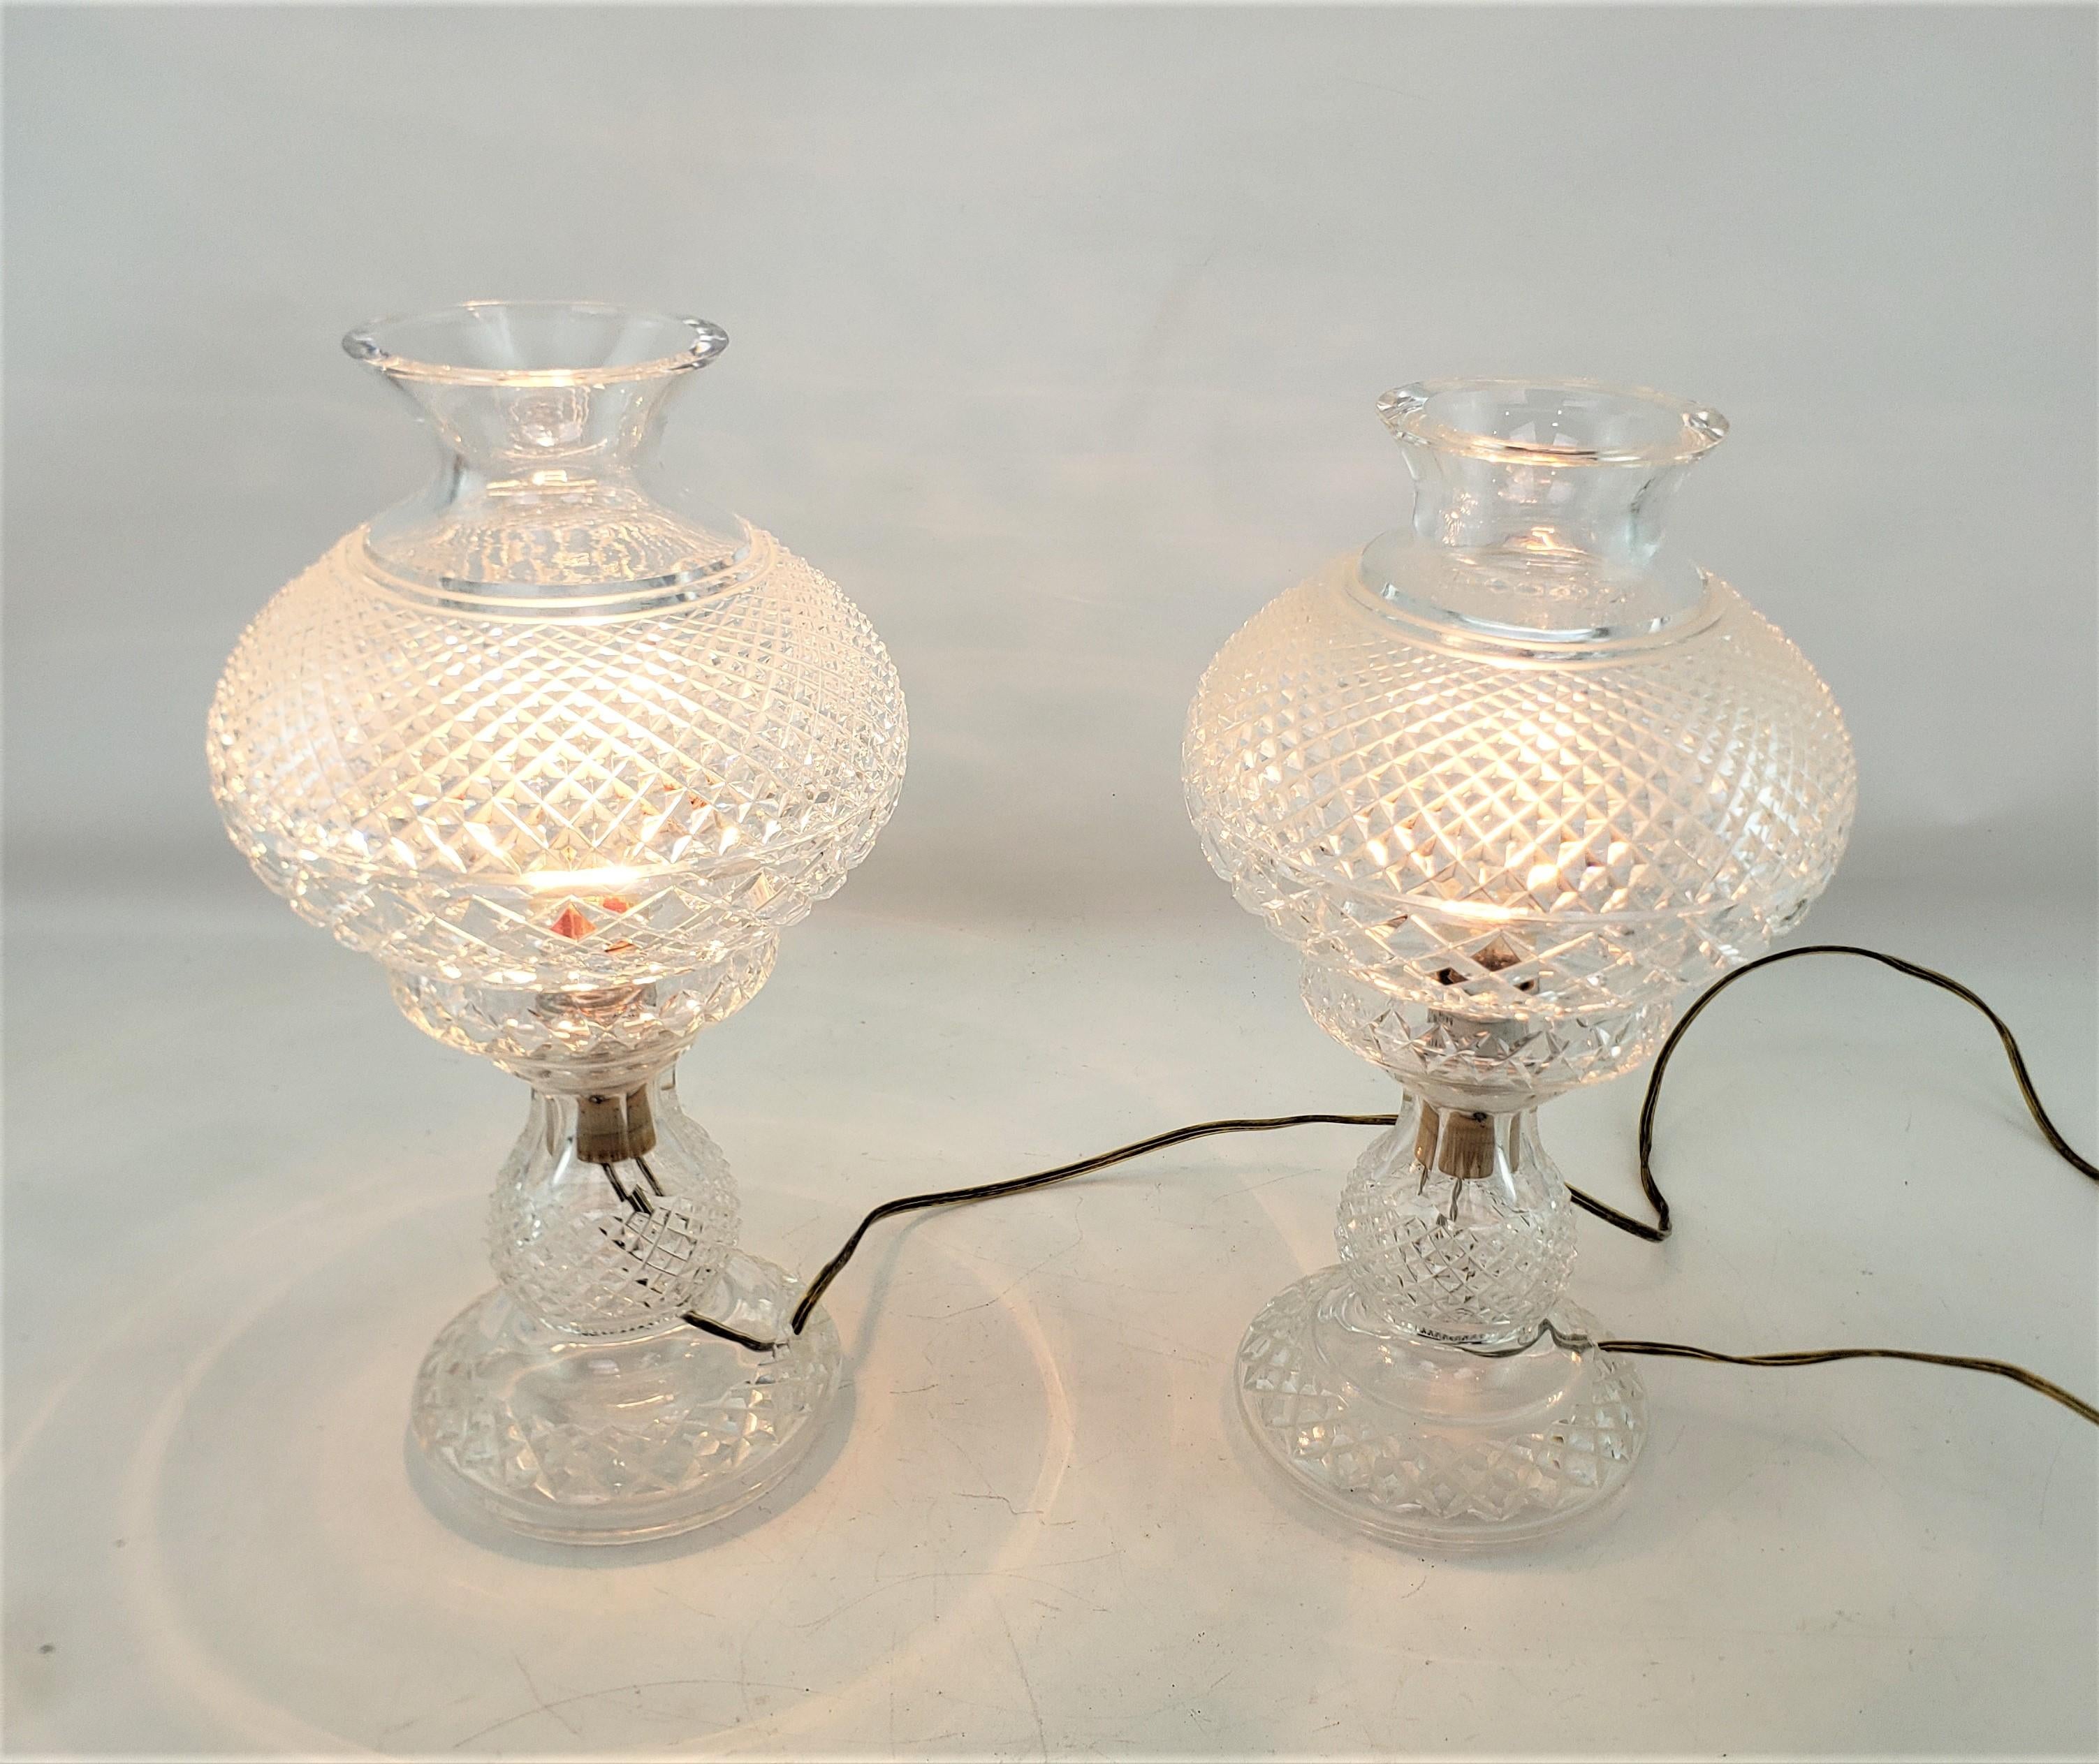 waterford lamps